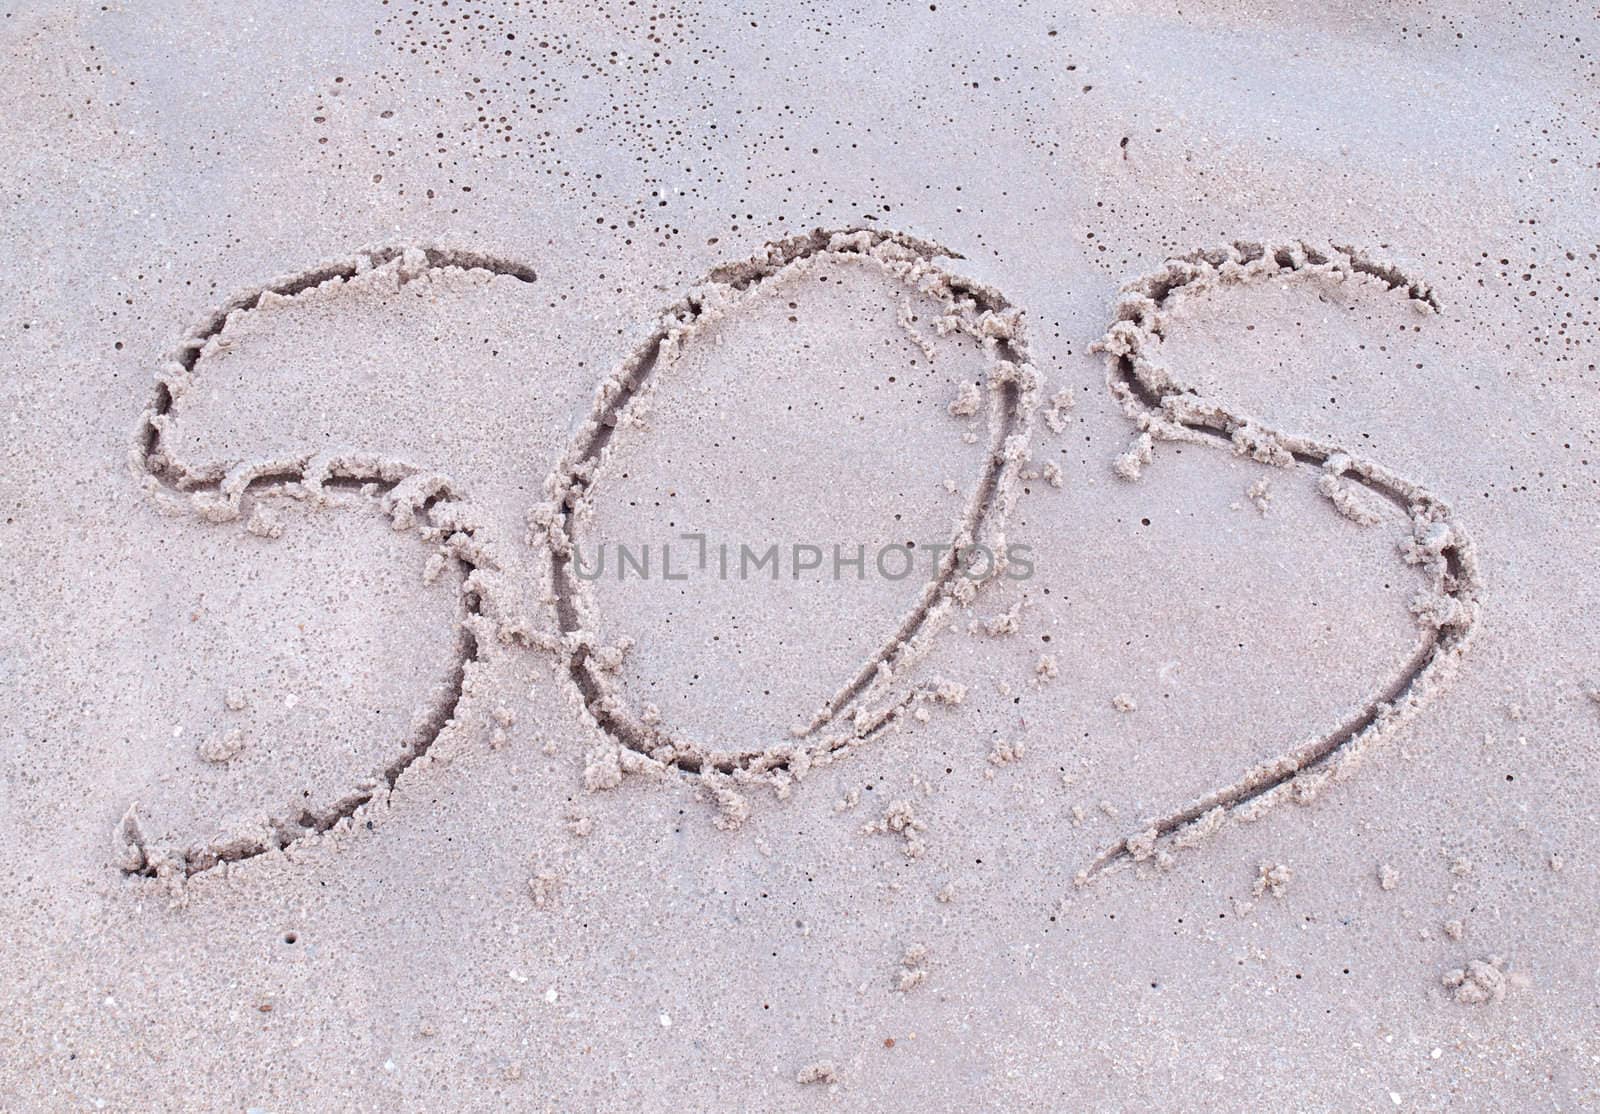 SOS(save our souls) drawn on the sand in tropical beach